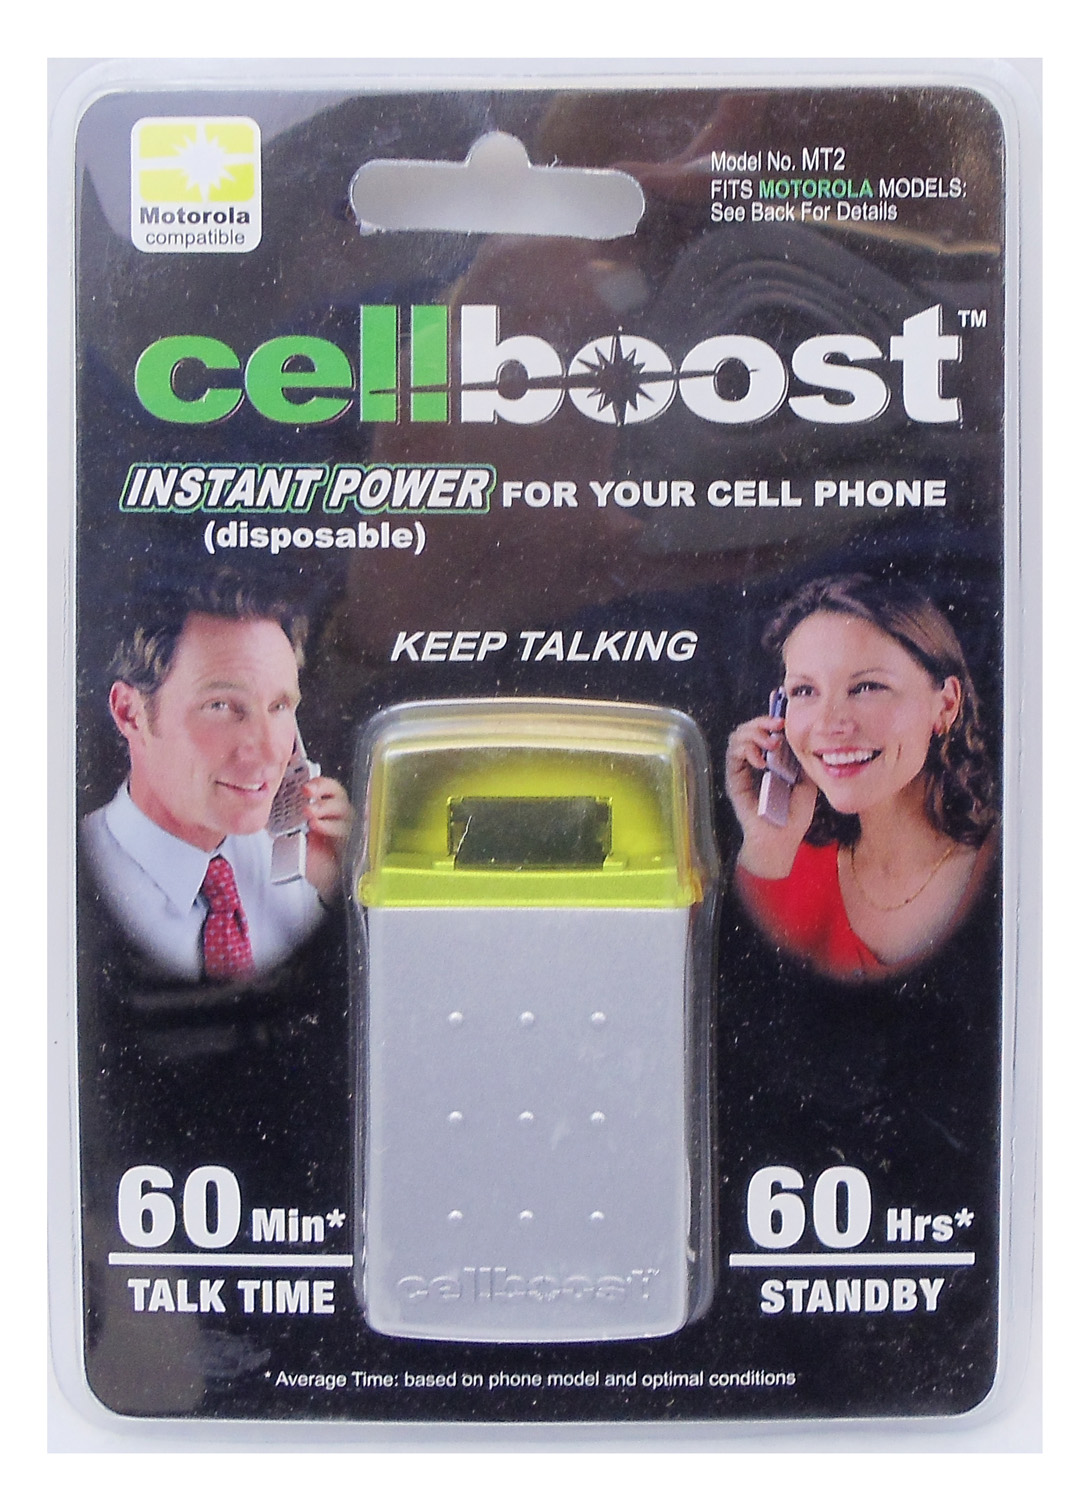 Cellboost Provides Instant Power Up To 60 Minutes Talk Time & 60 Hours Standby For Motorola Star Track & Other Phones